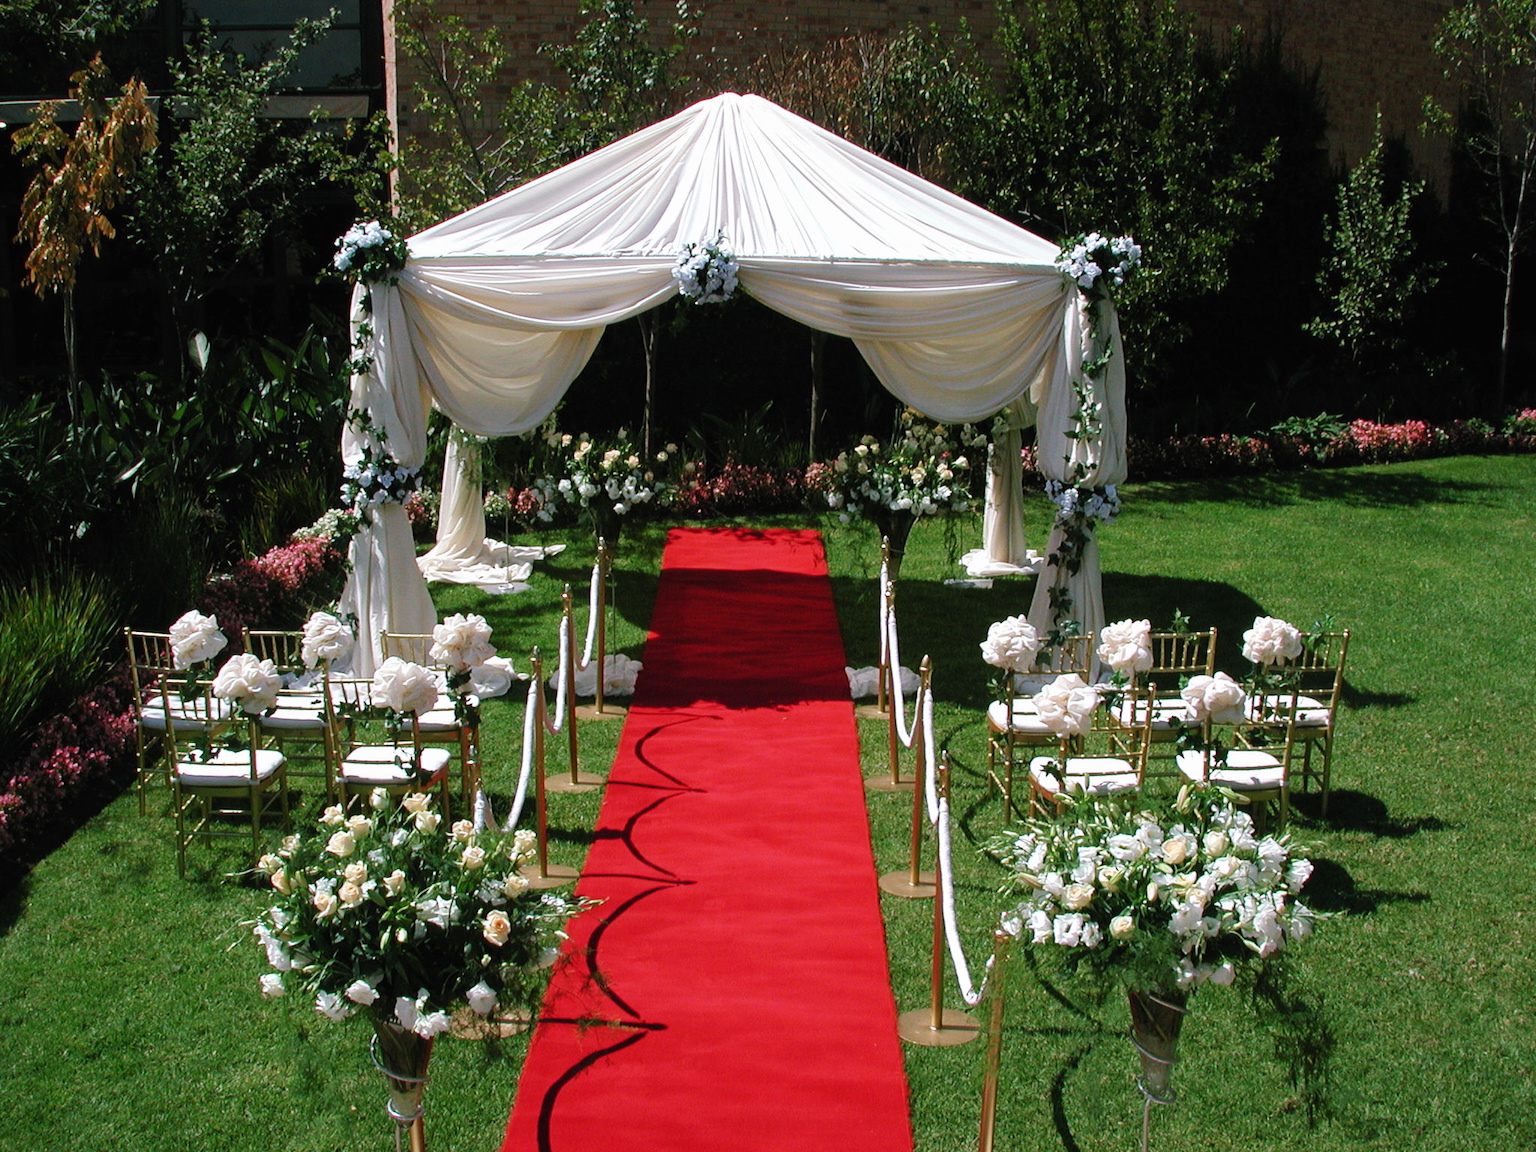 if-you-like-the-grass-view-then-you-can-set-the-wedding-in-the-garden-with-best-design-and-outdoor-wedding-reception-ideas